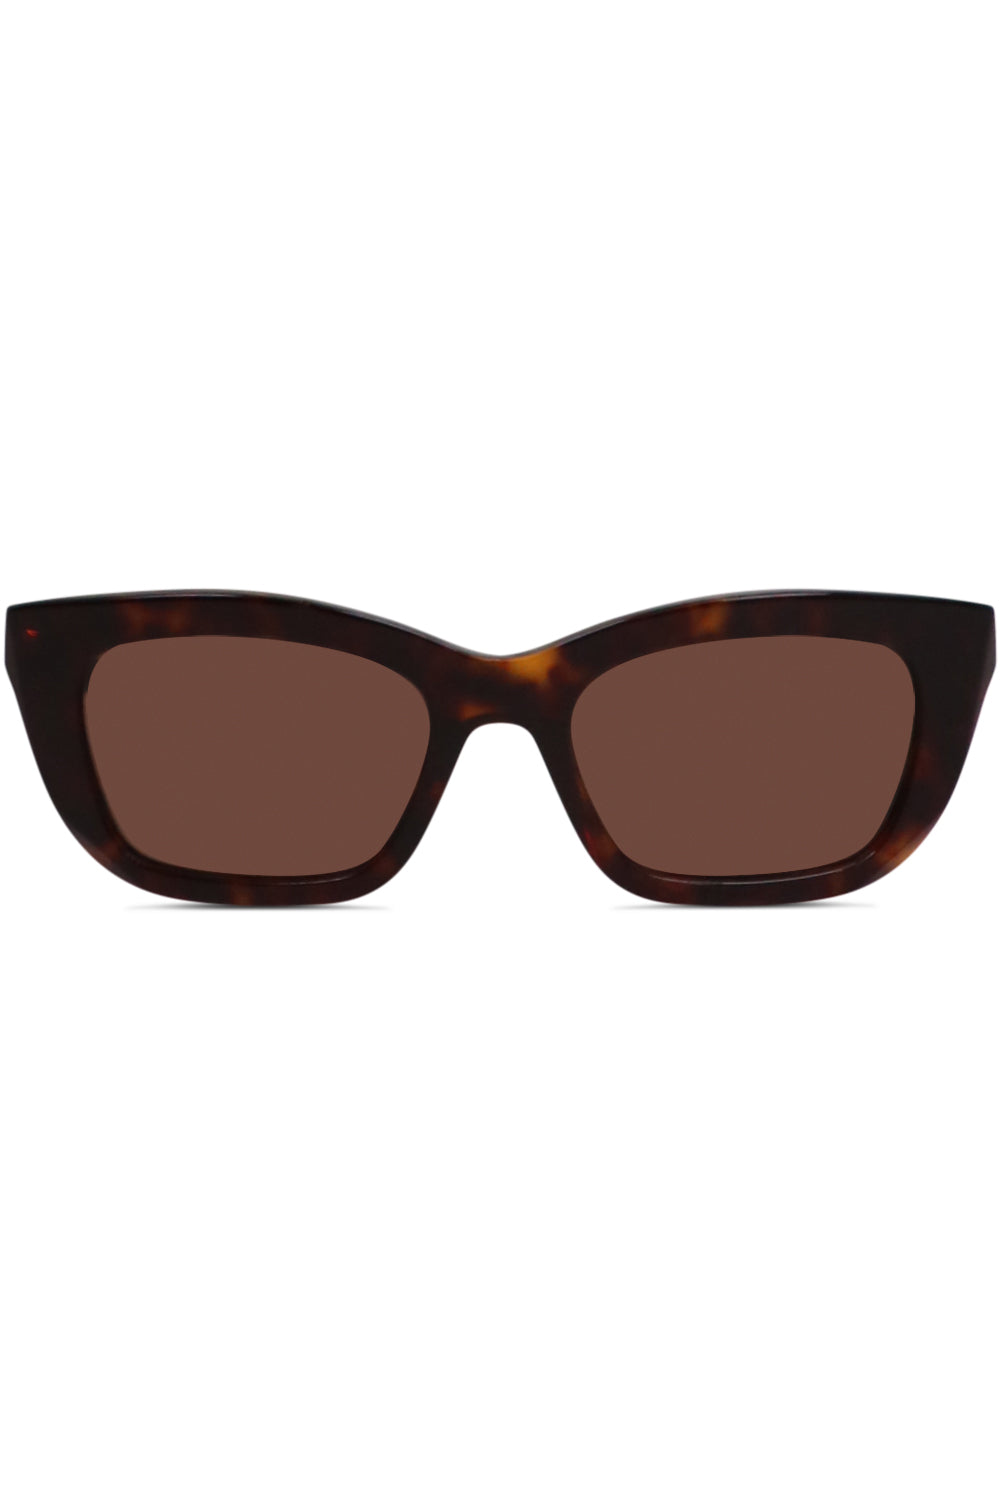 GIVENCHY ACCESSORIES MULTI RECTANGLE SUNGLASSES | HAVANA/BROWN